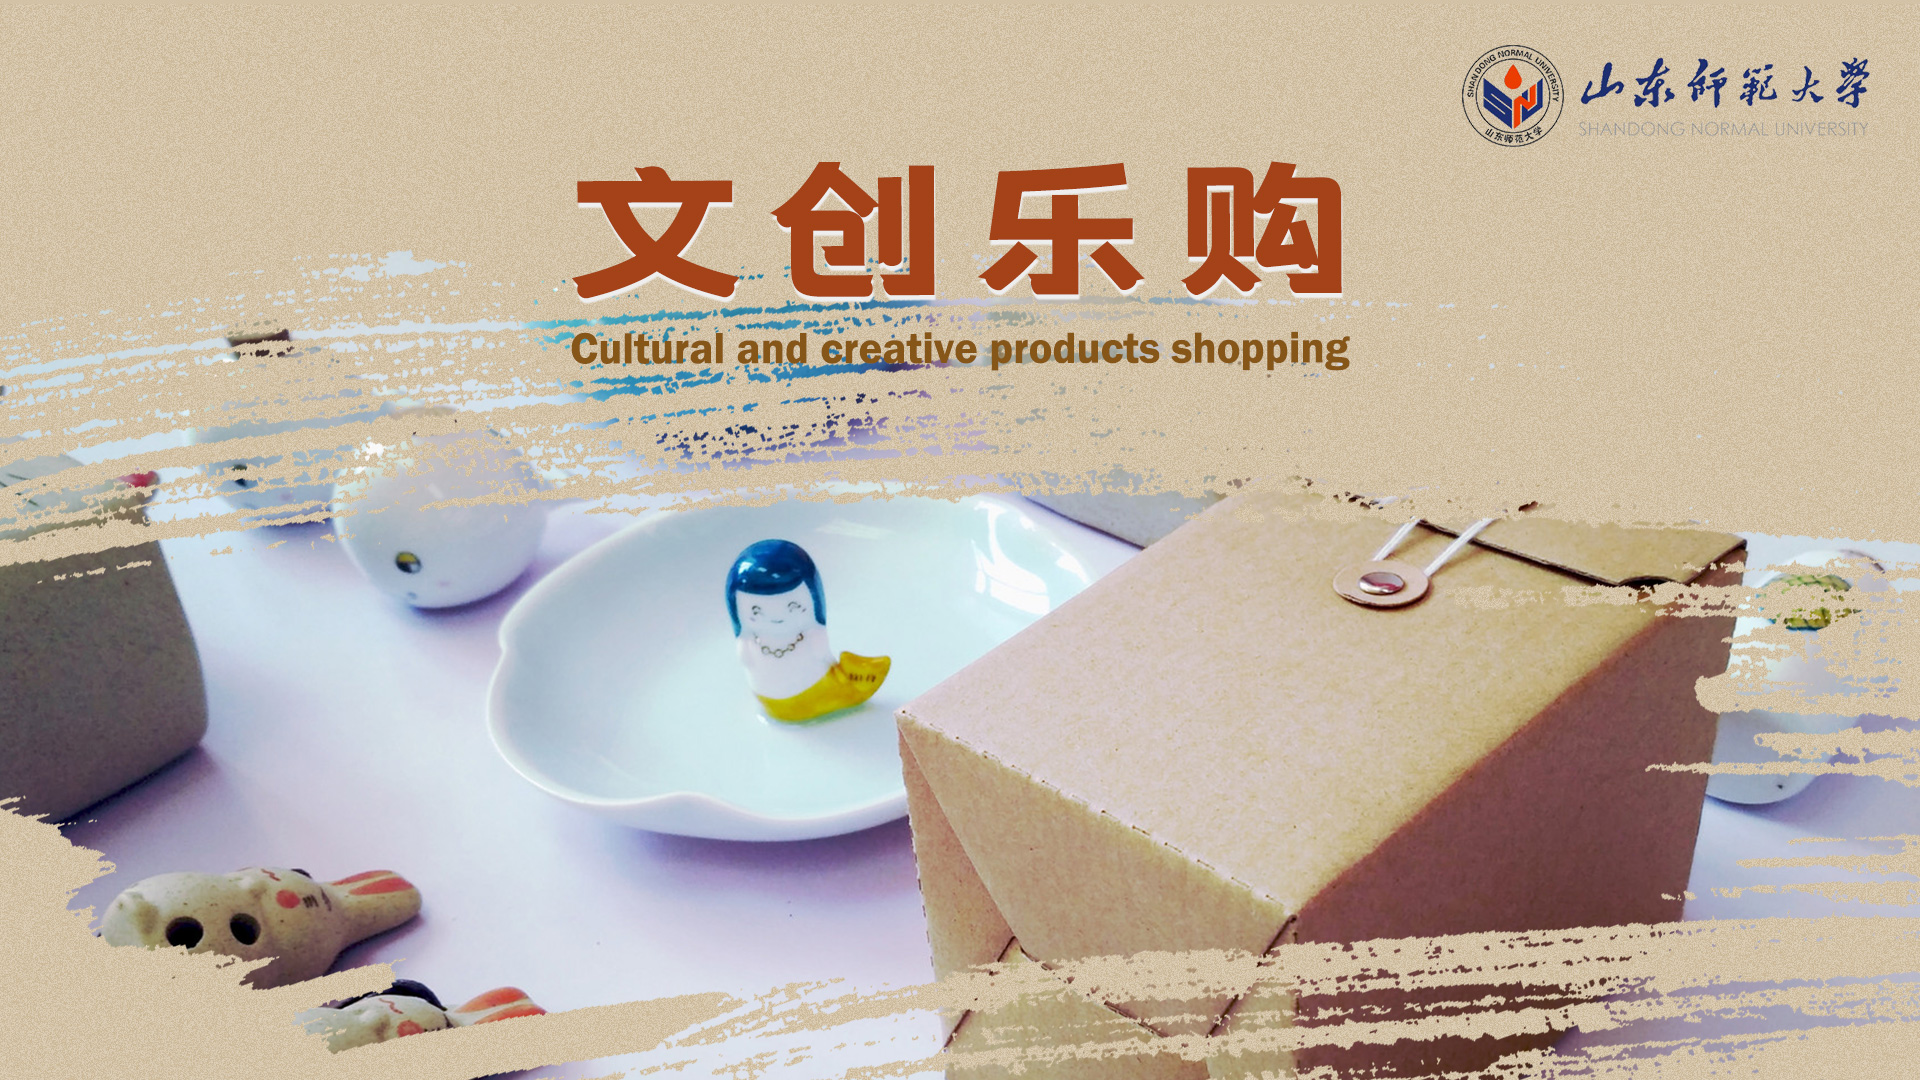 Cultural and creative products shopping